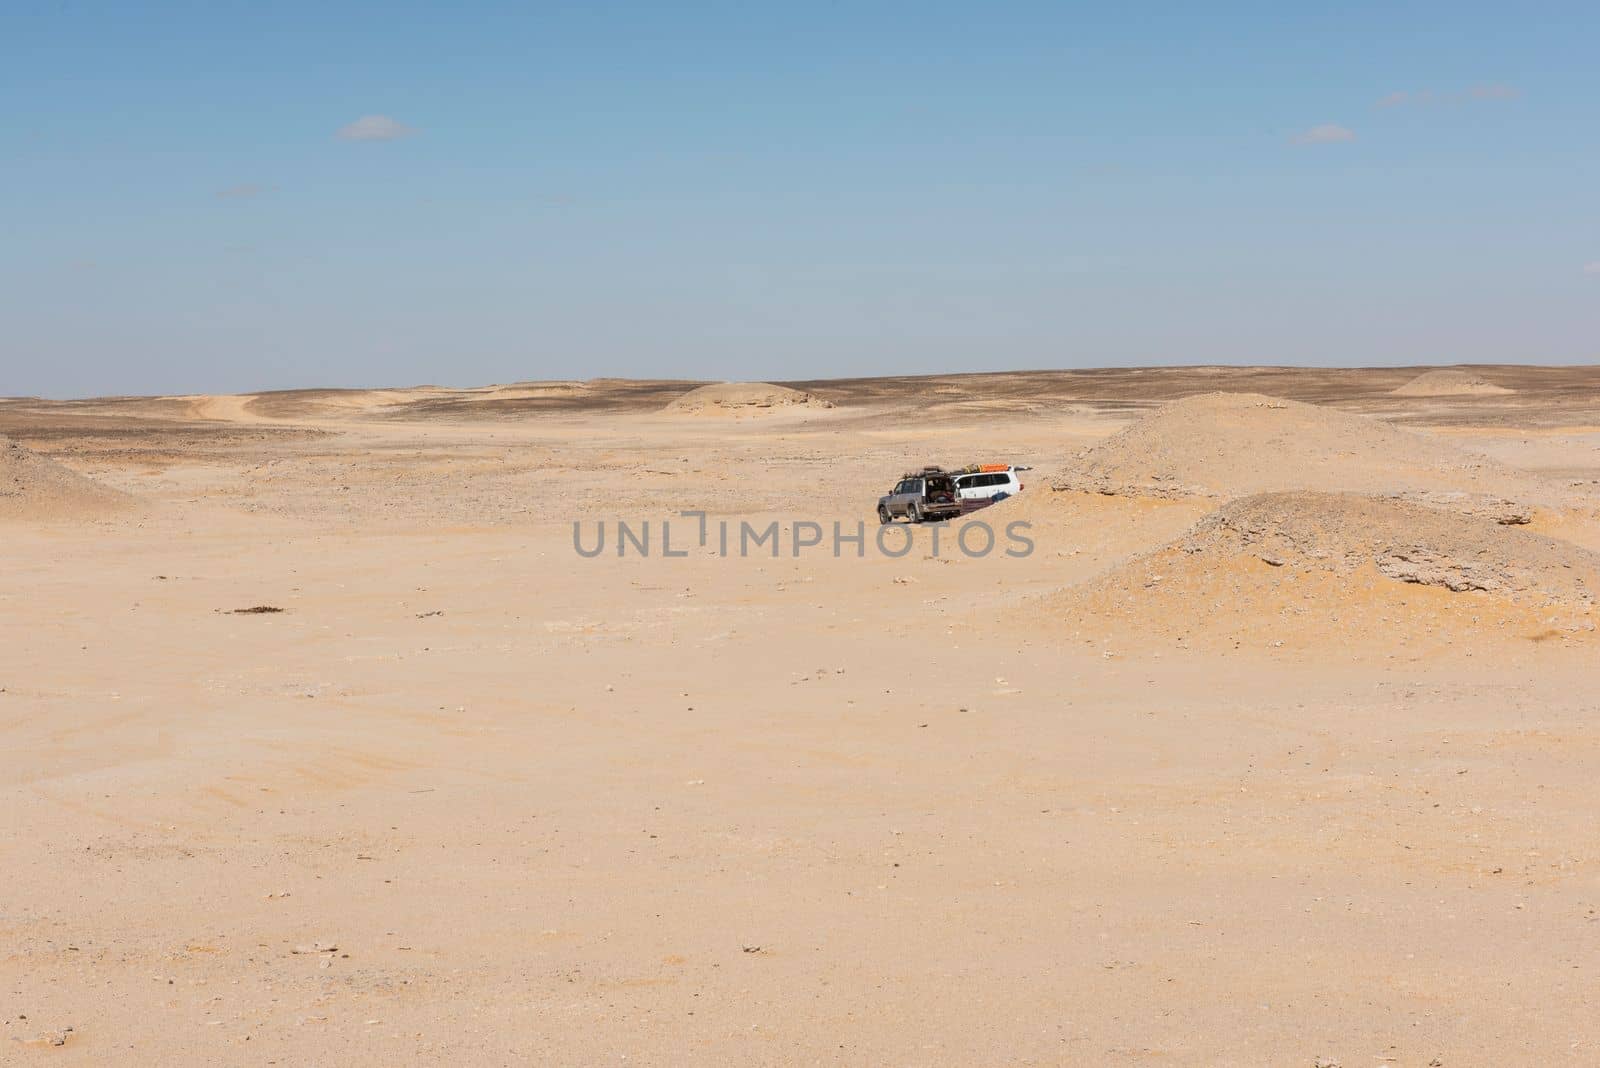 Landscape scenic view of desolate barren western desert in Egypt with rocky vista and off-road vehicle